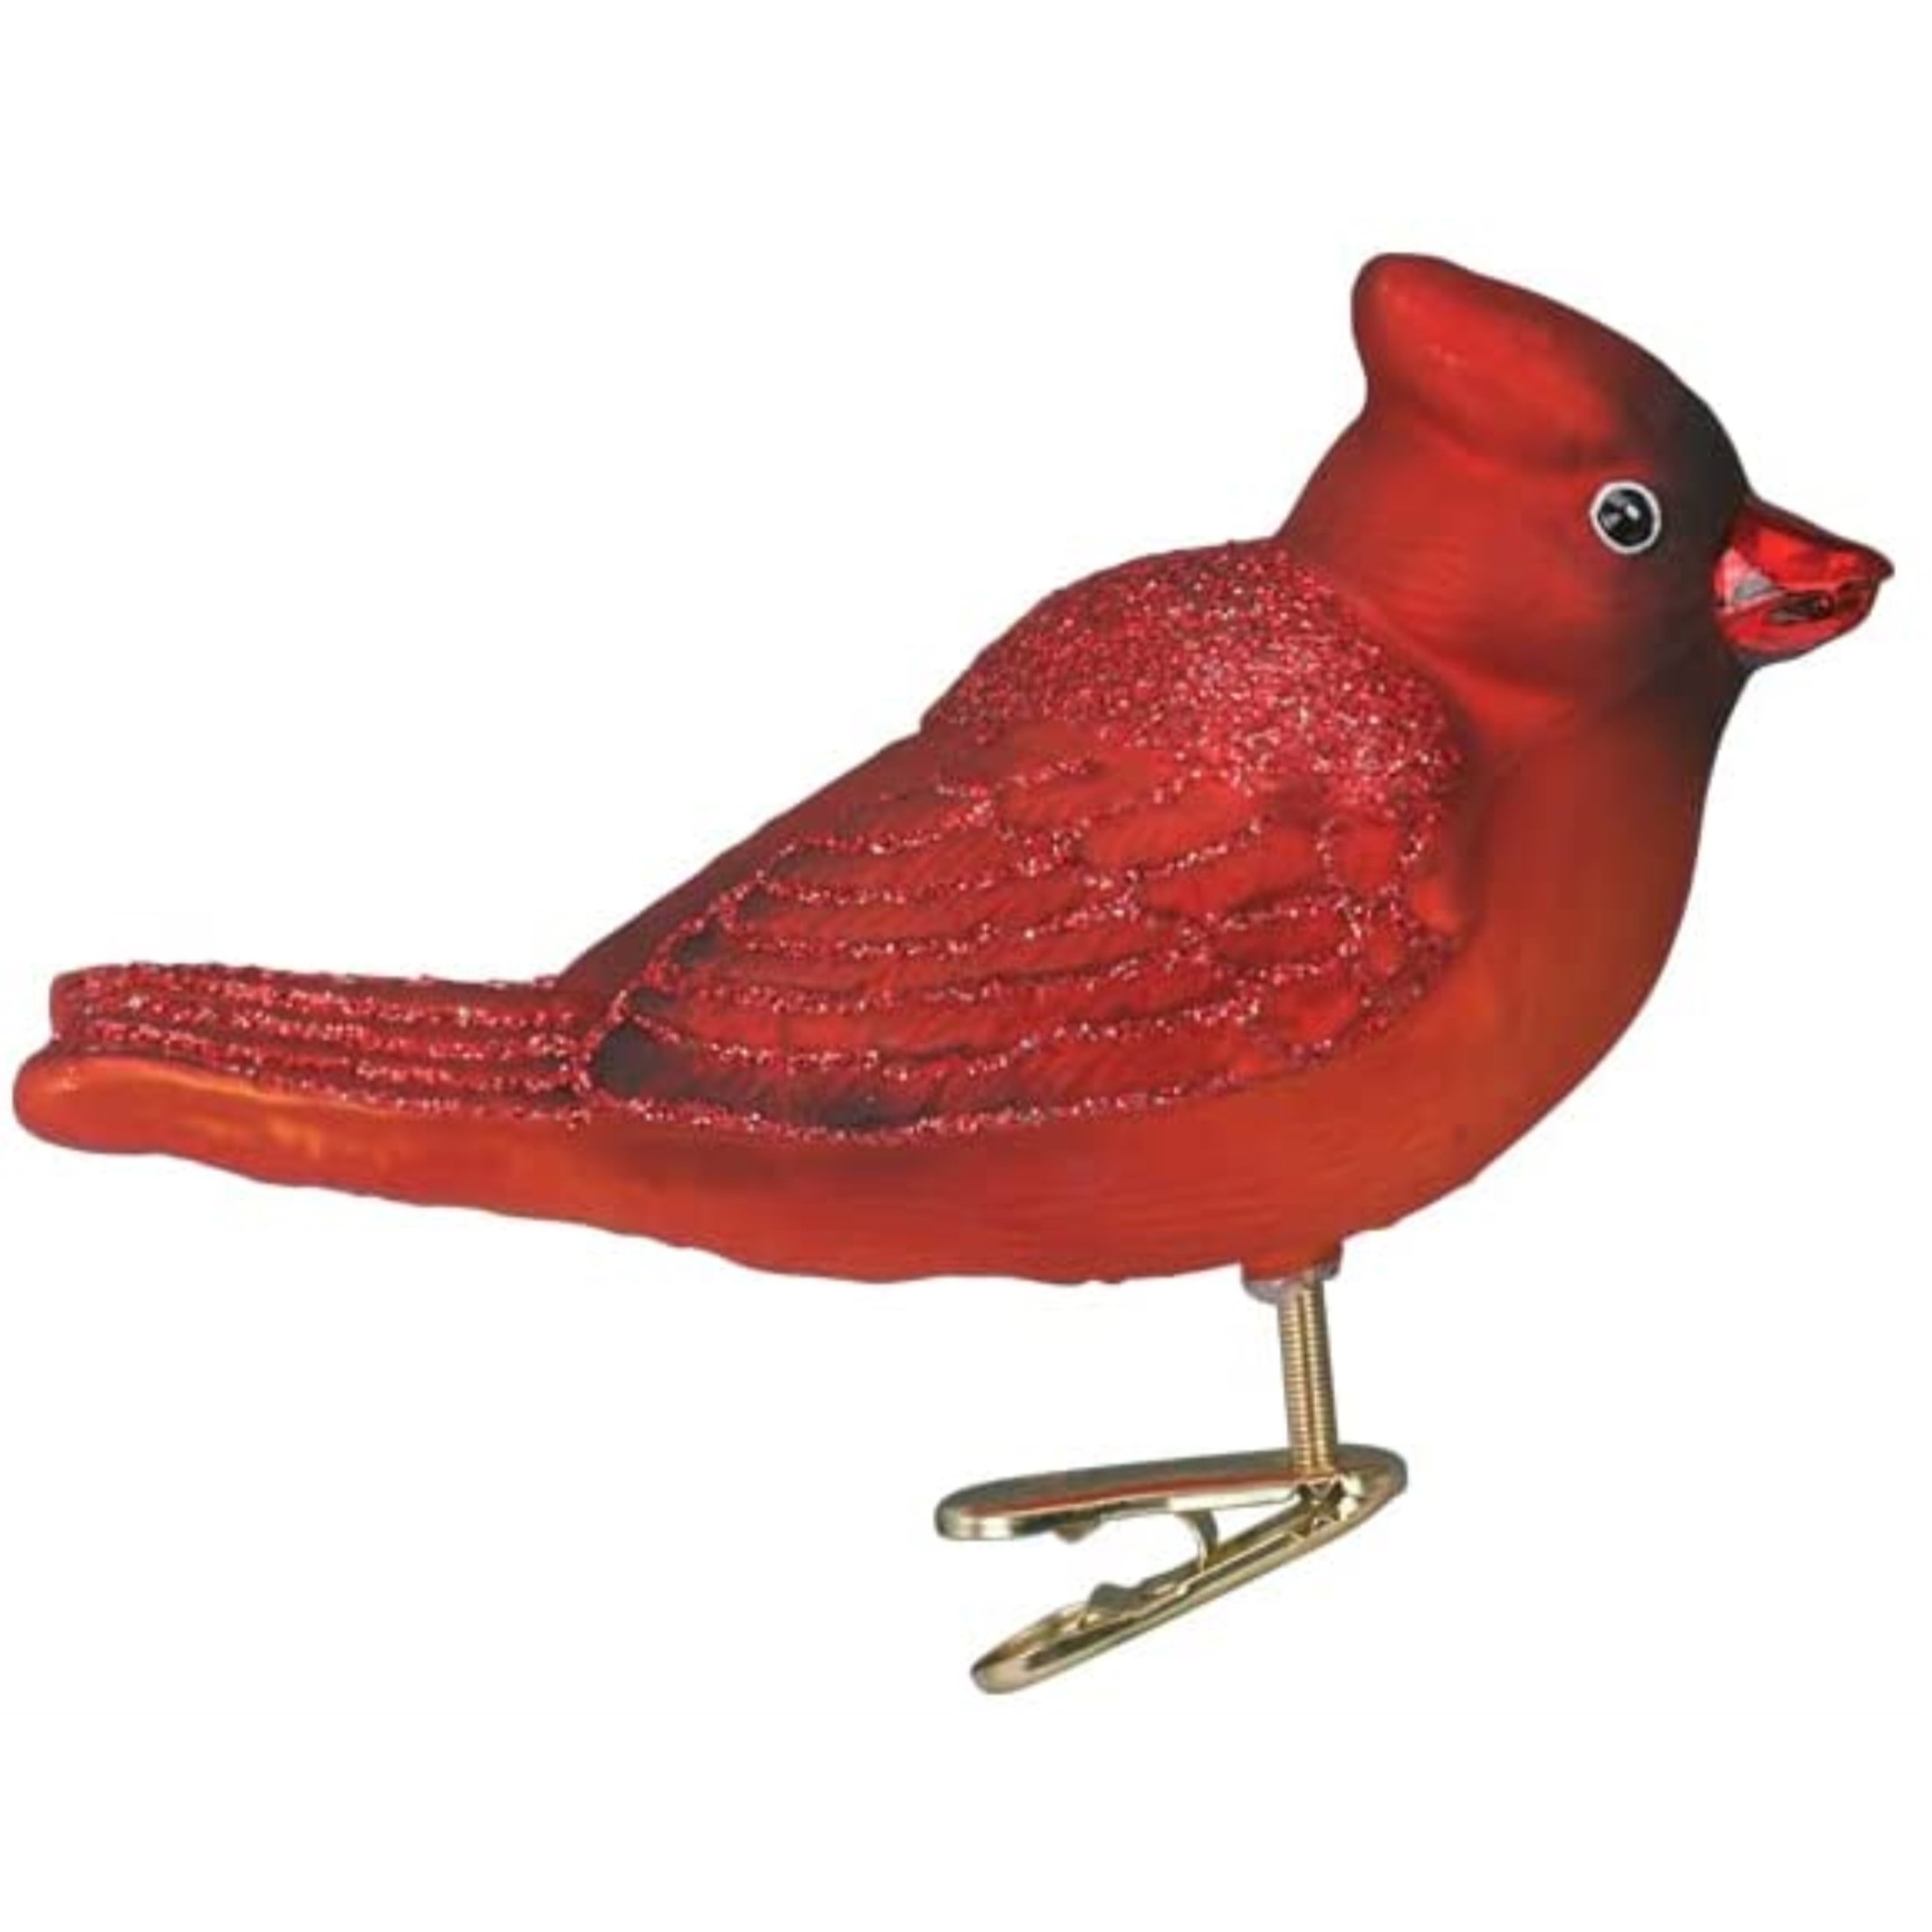 Old World Christmas Glass Blown Ornament, Bright Red Cardinal (With OWC Gift Box)